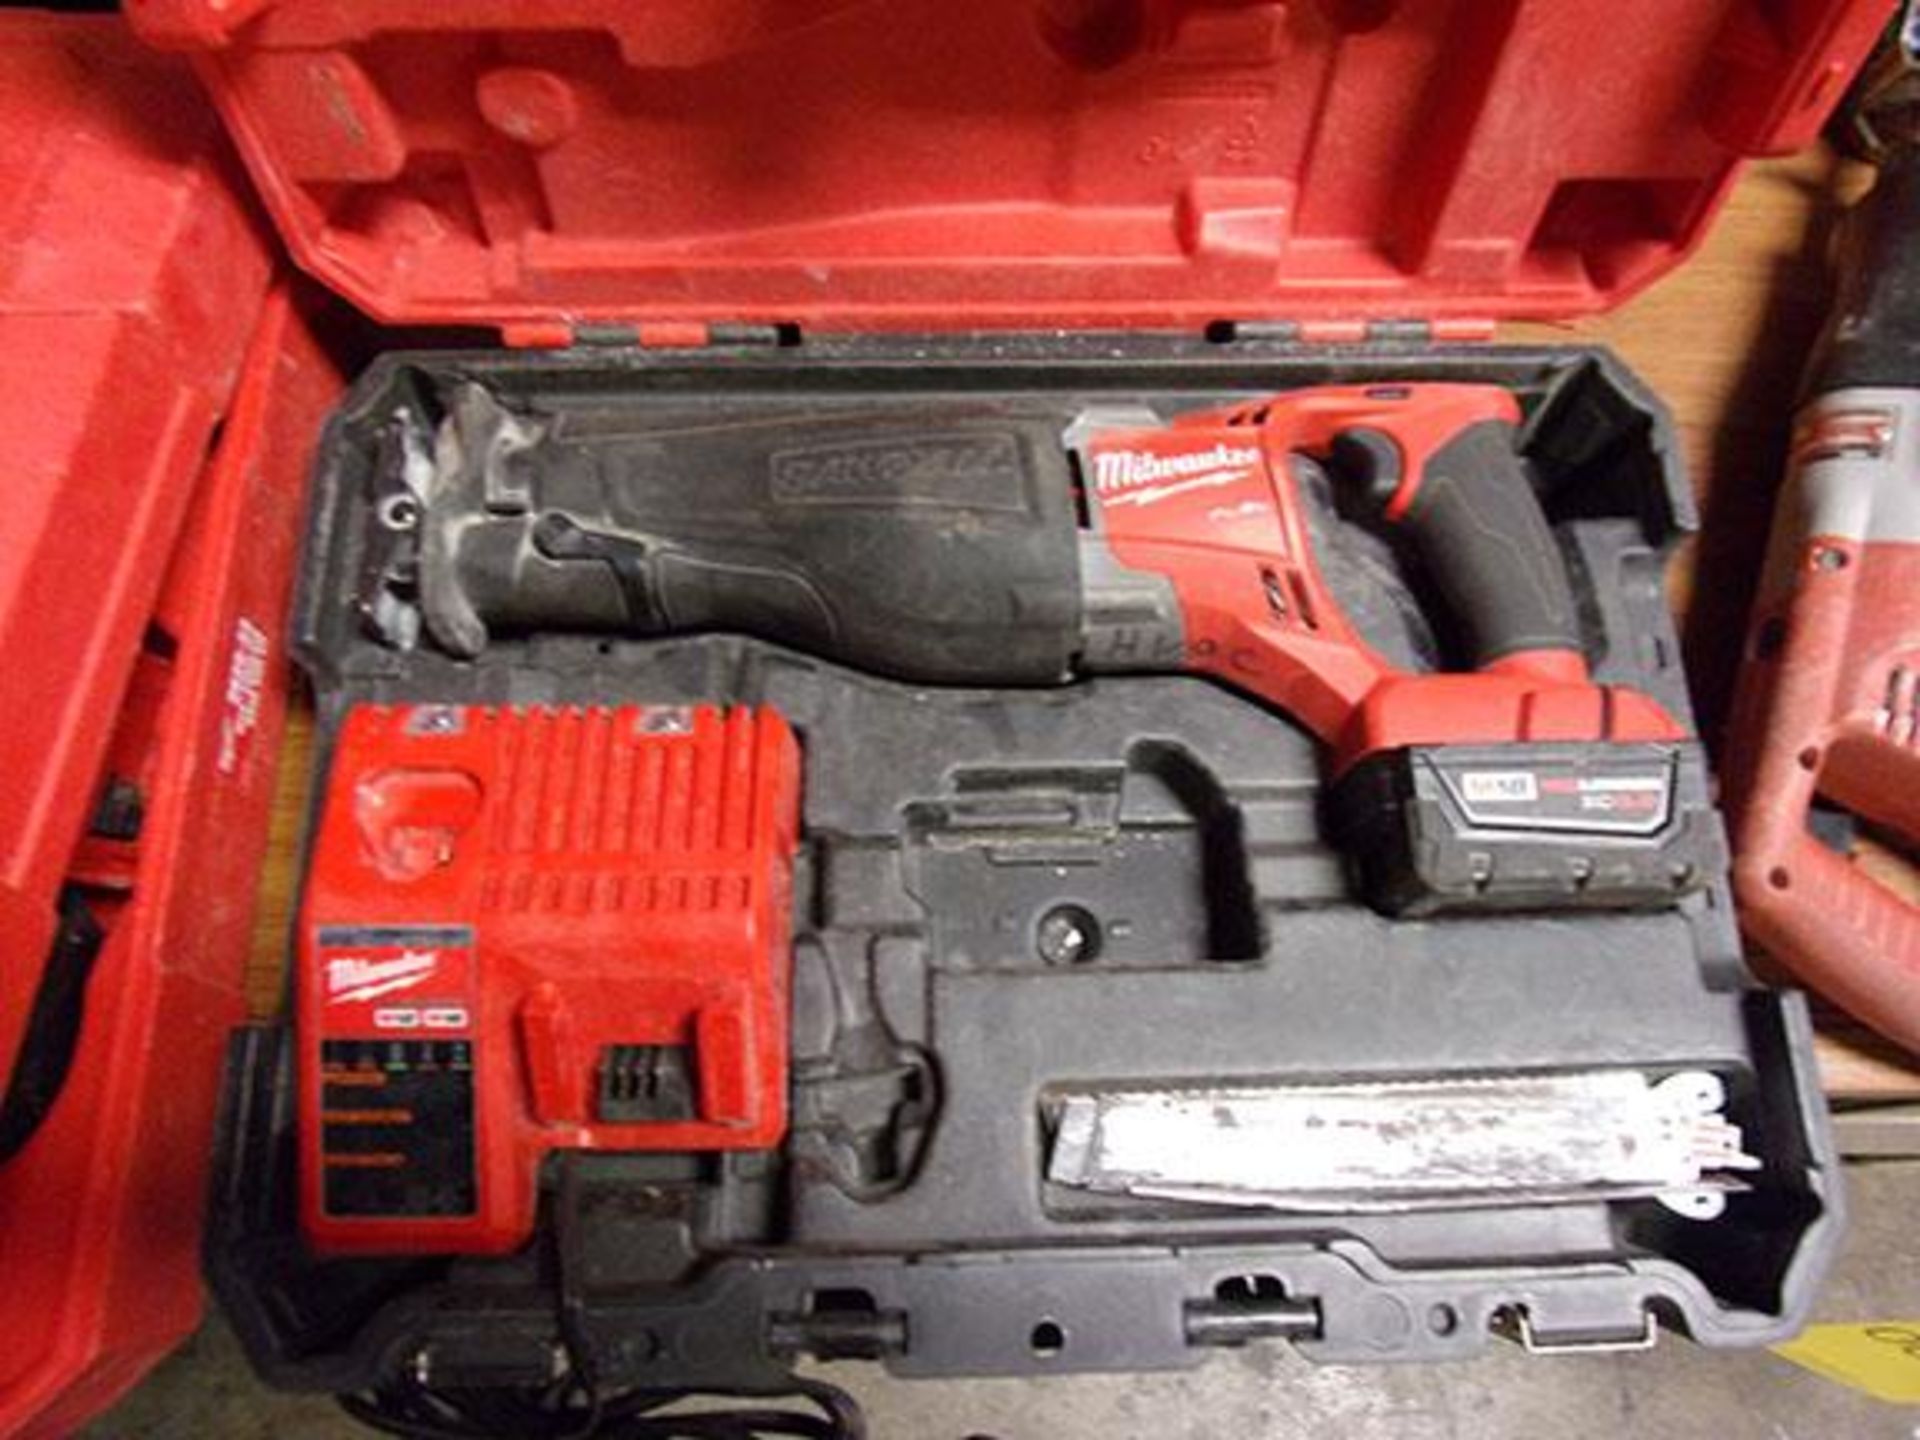 MILWAUKEE M18V FUEL SAWZALL WITH CHARGER & BATTERIES